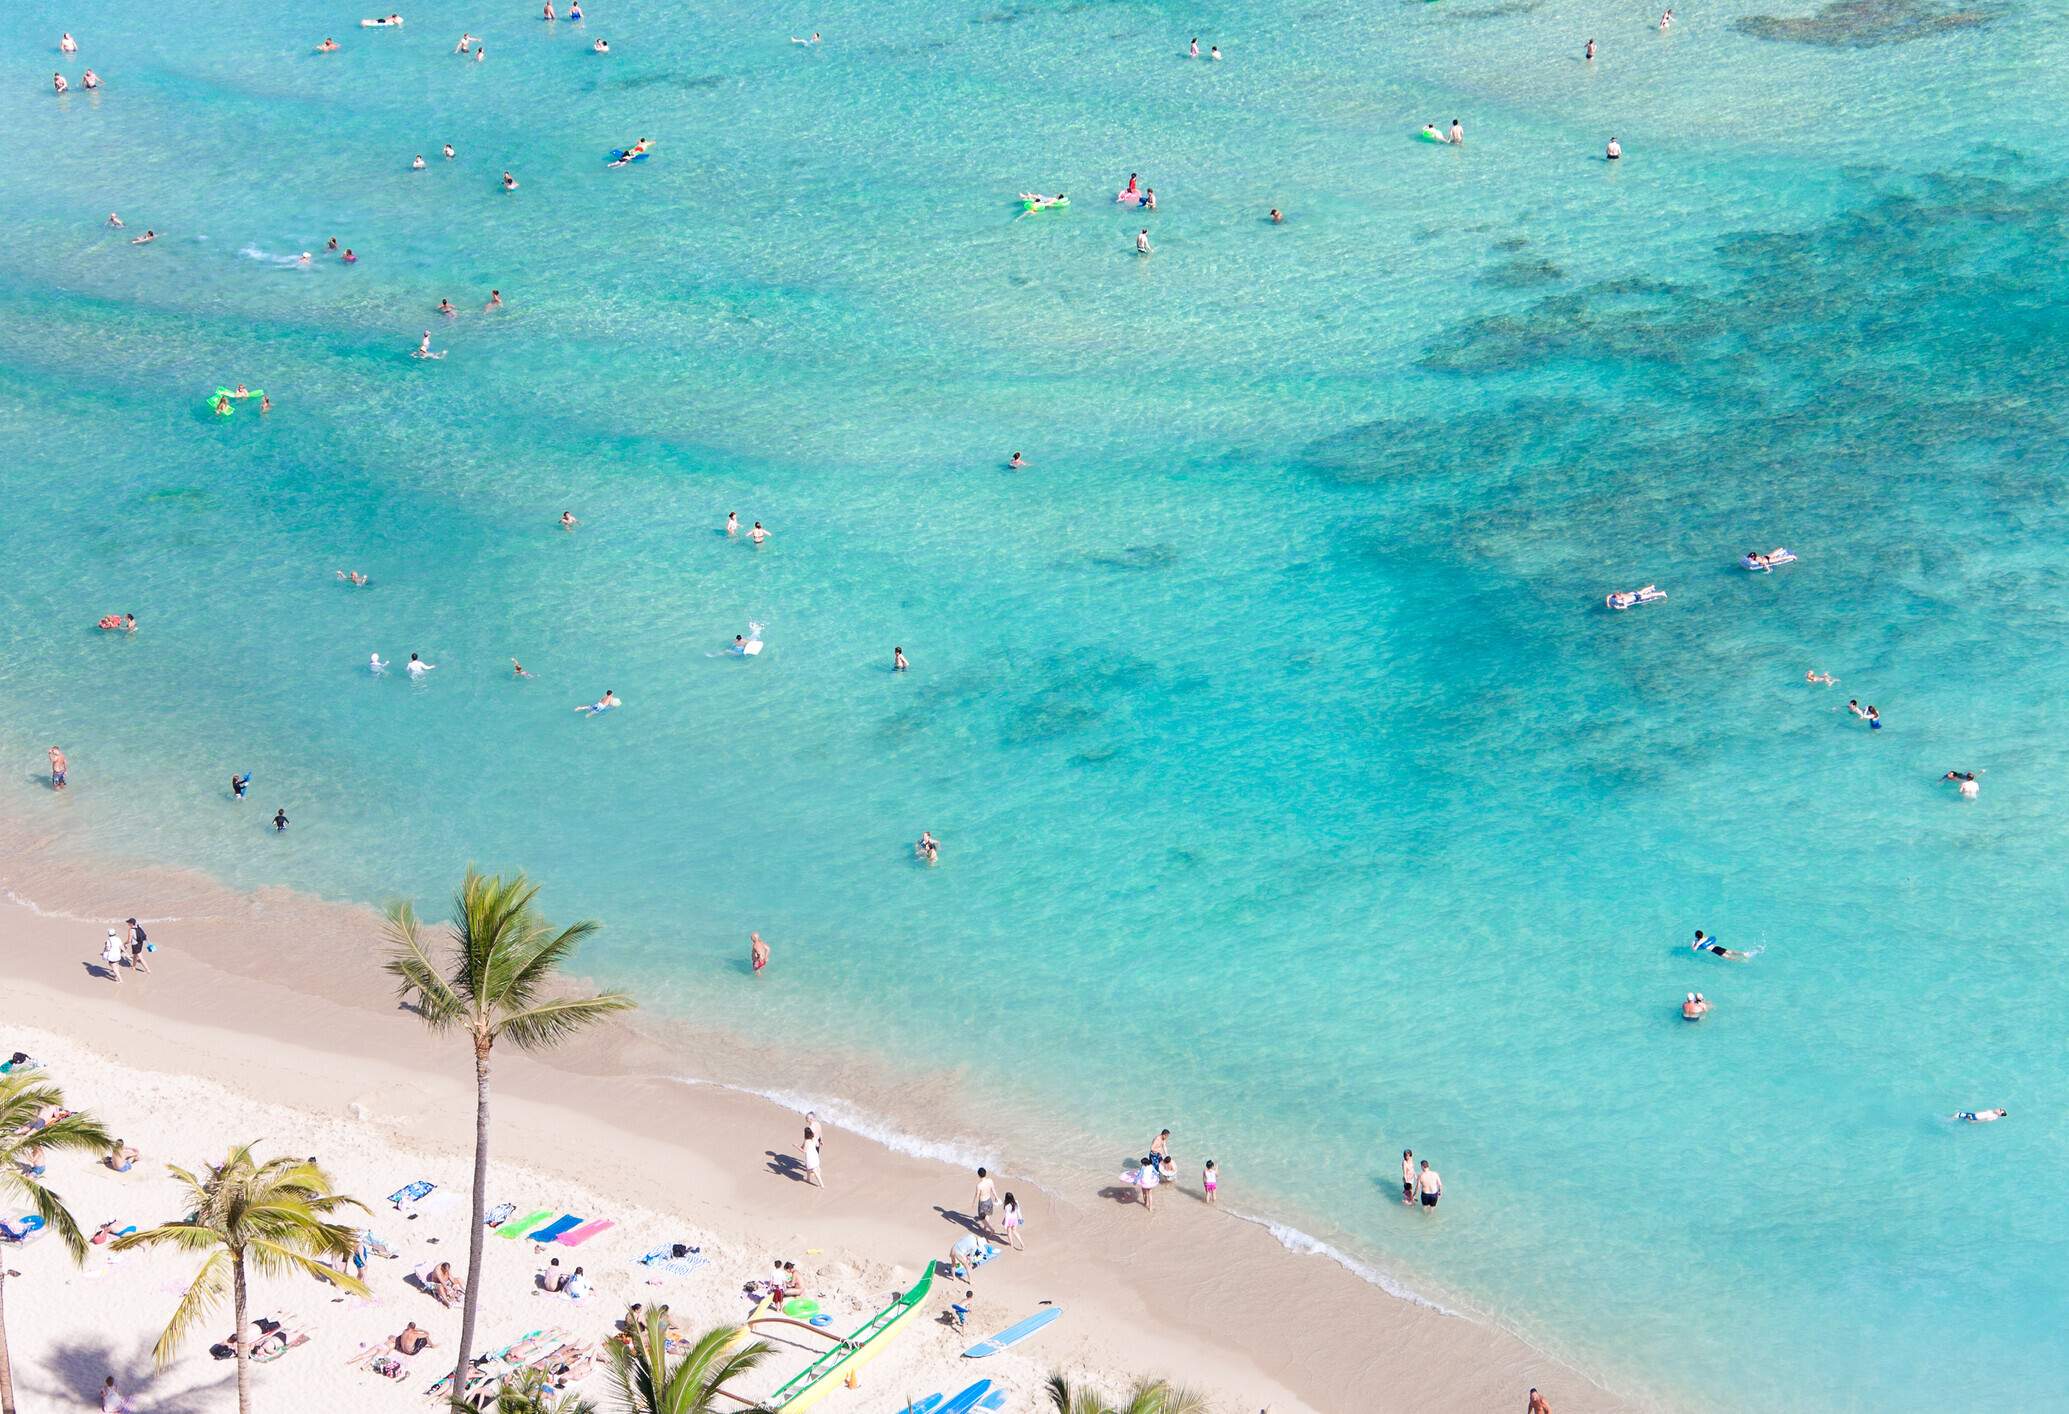 Many beachgoers swim in the shallow, turquoise, crystal-clear seawater.